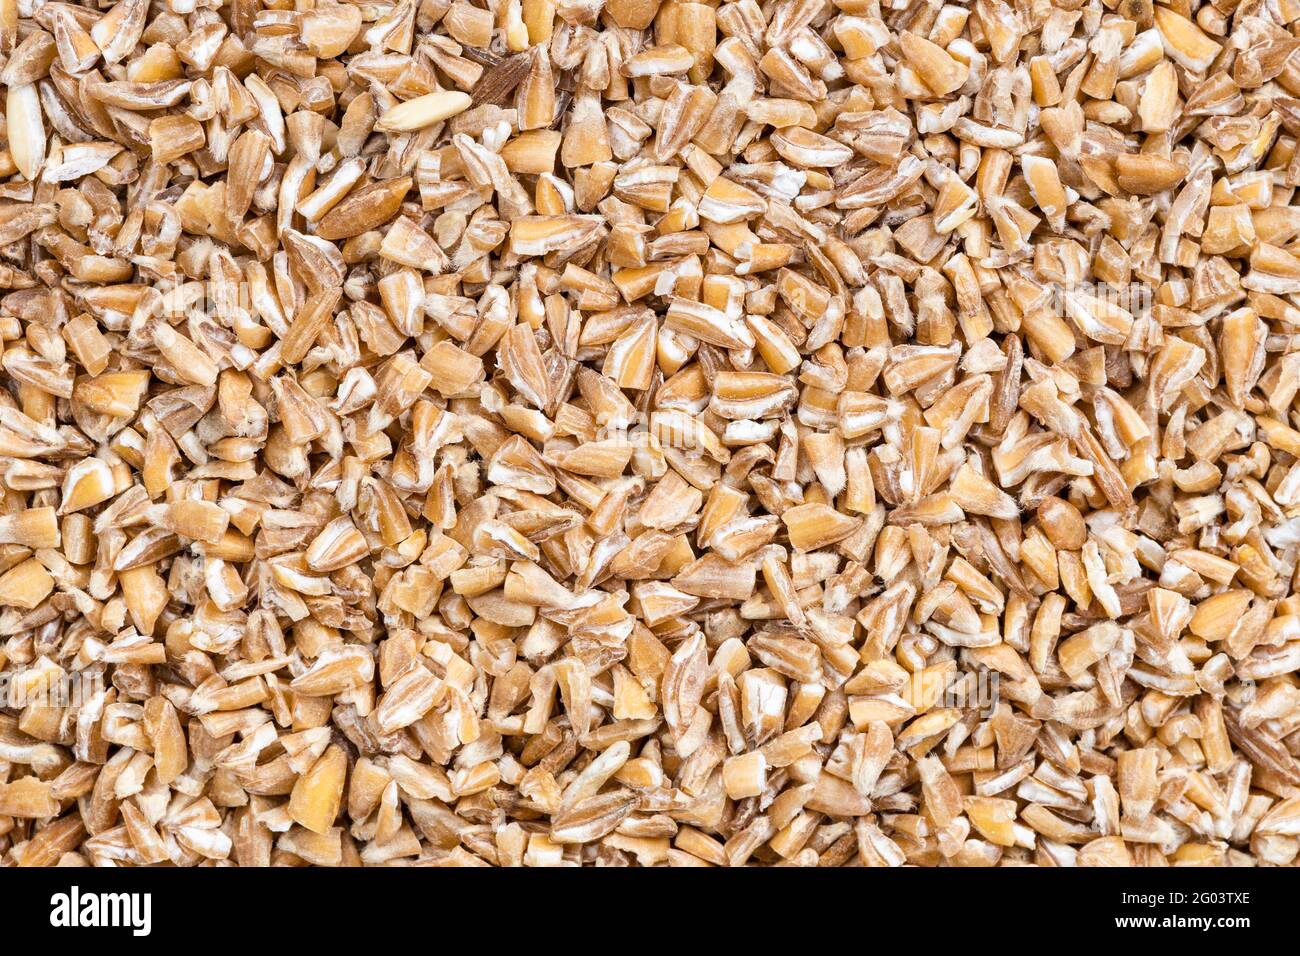 food background - uncooked crushed Emmer farro hulled wheat groats Stock Photo